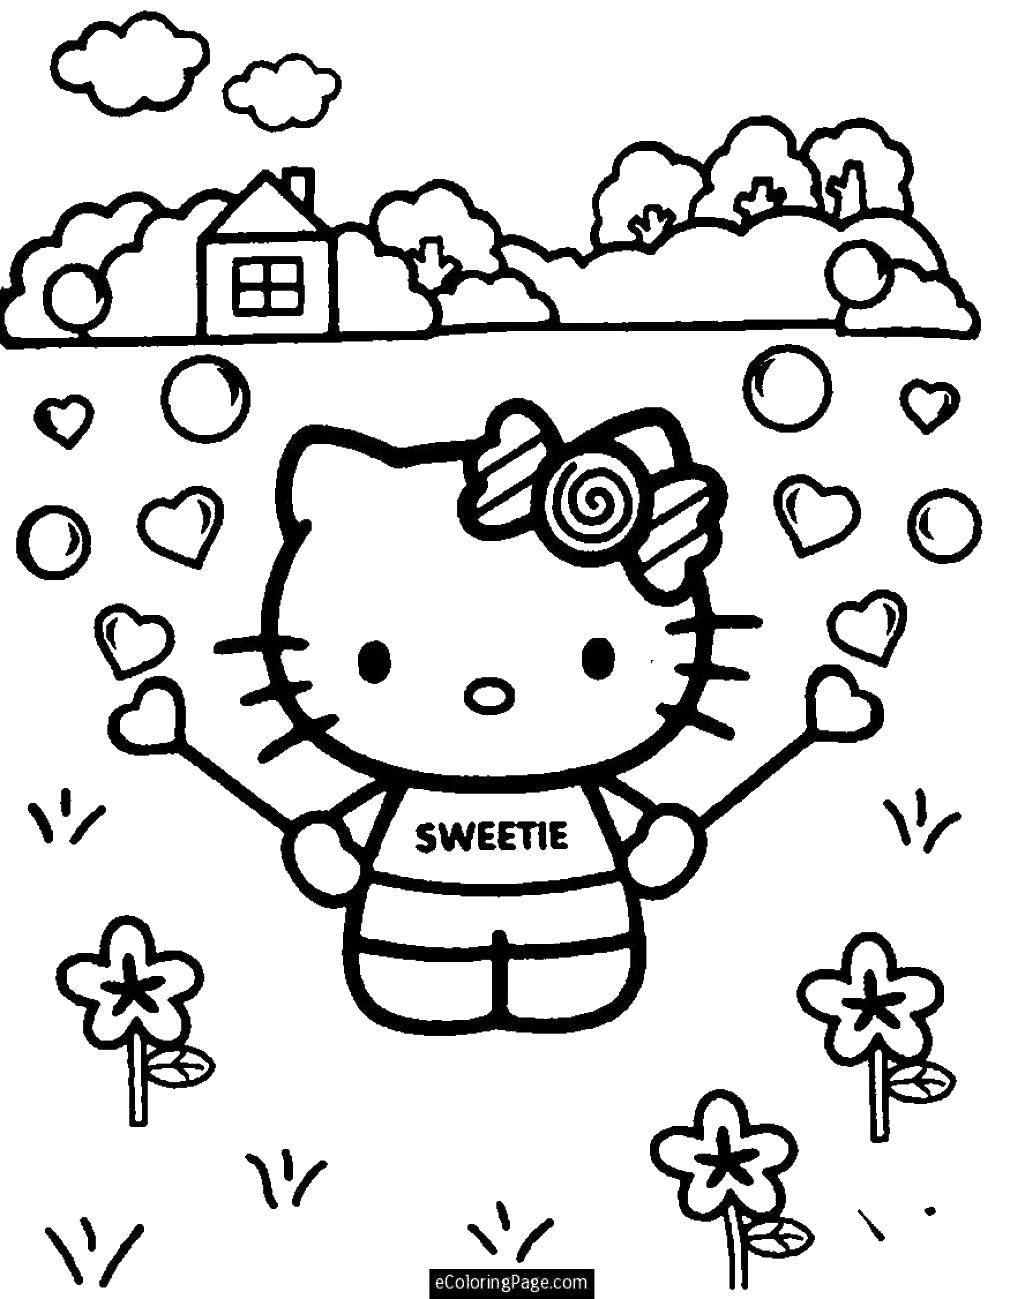 Coloring Hello kitty and hearts. Category Hello Kitty. Tags:  Hello Kitt, hearts, bubbles, house, trees.